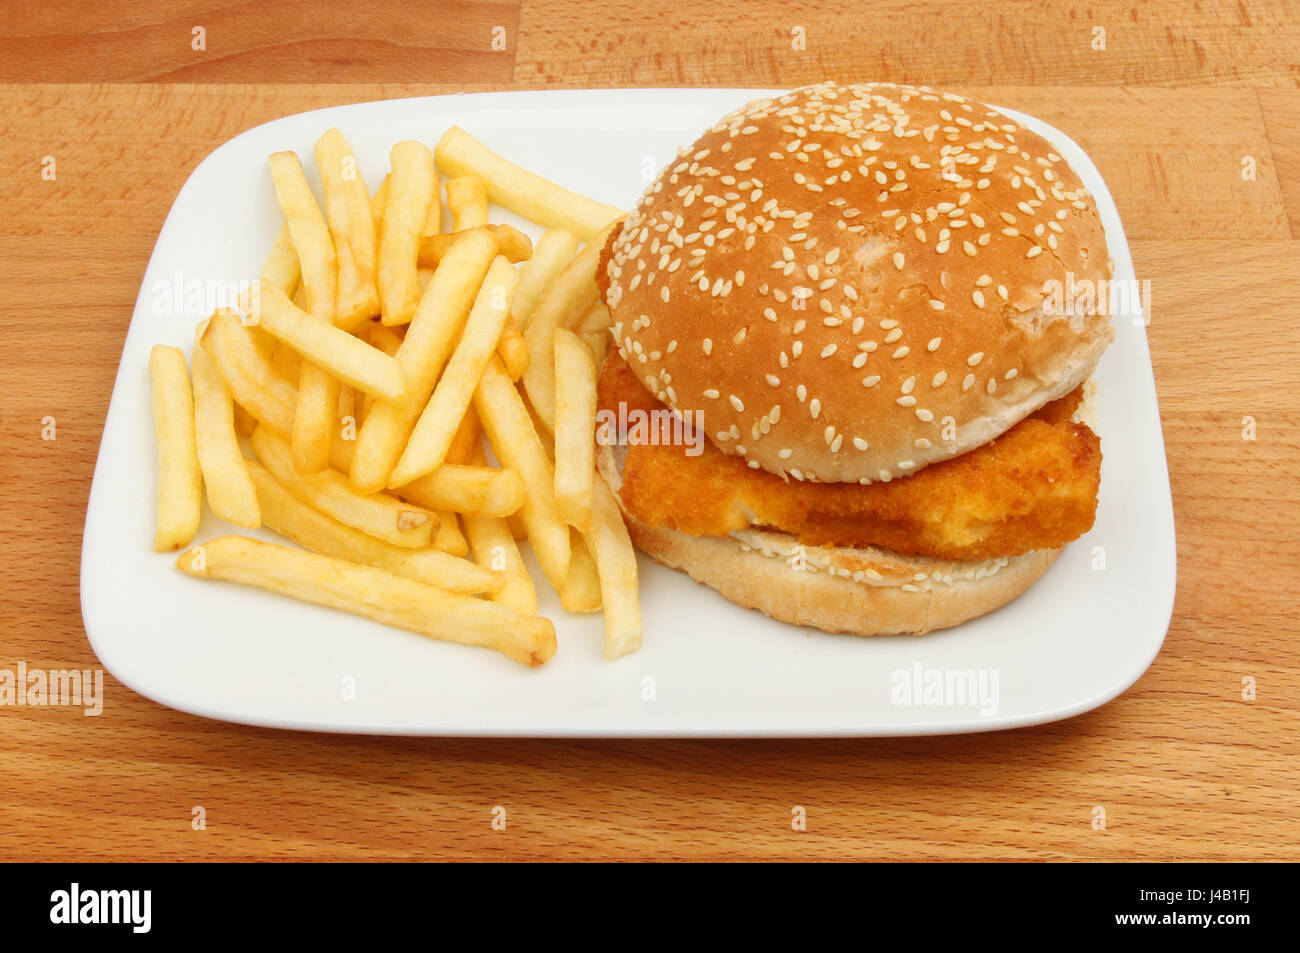 Fish burger, fish fingers in a burger bun with French fries on a plate on a wooden tabletop Stock Photo